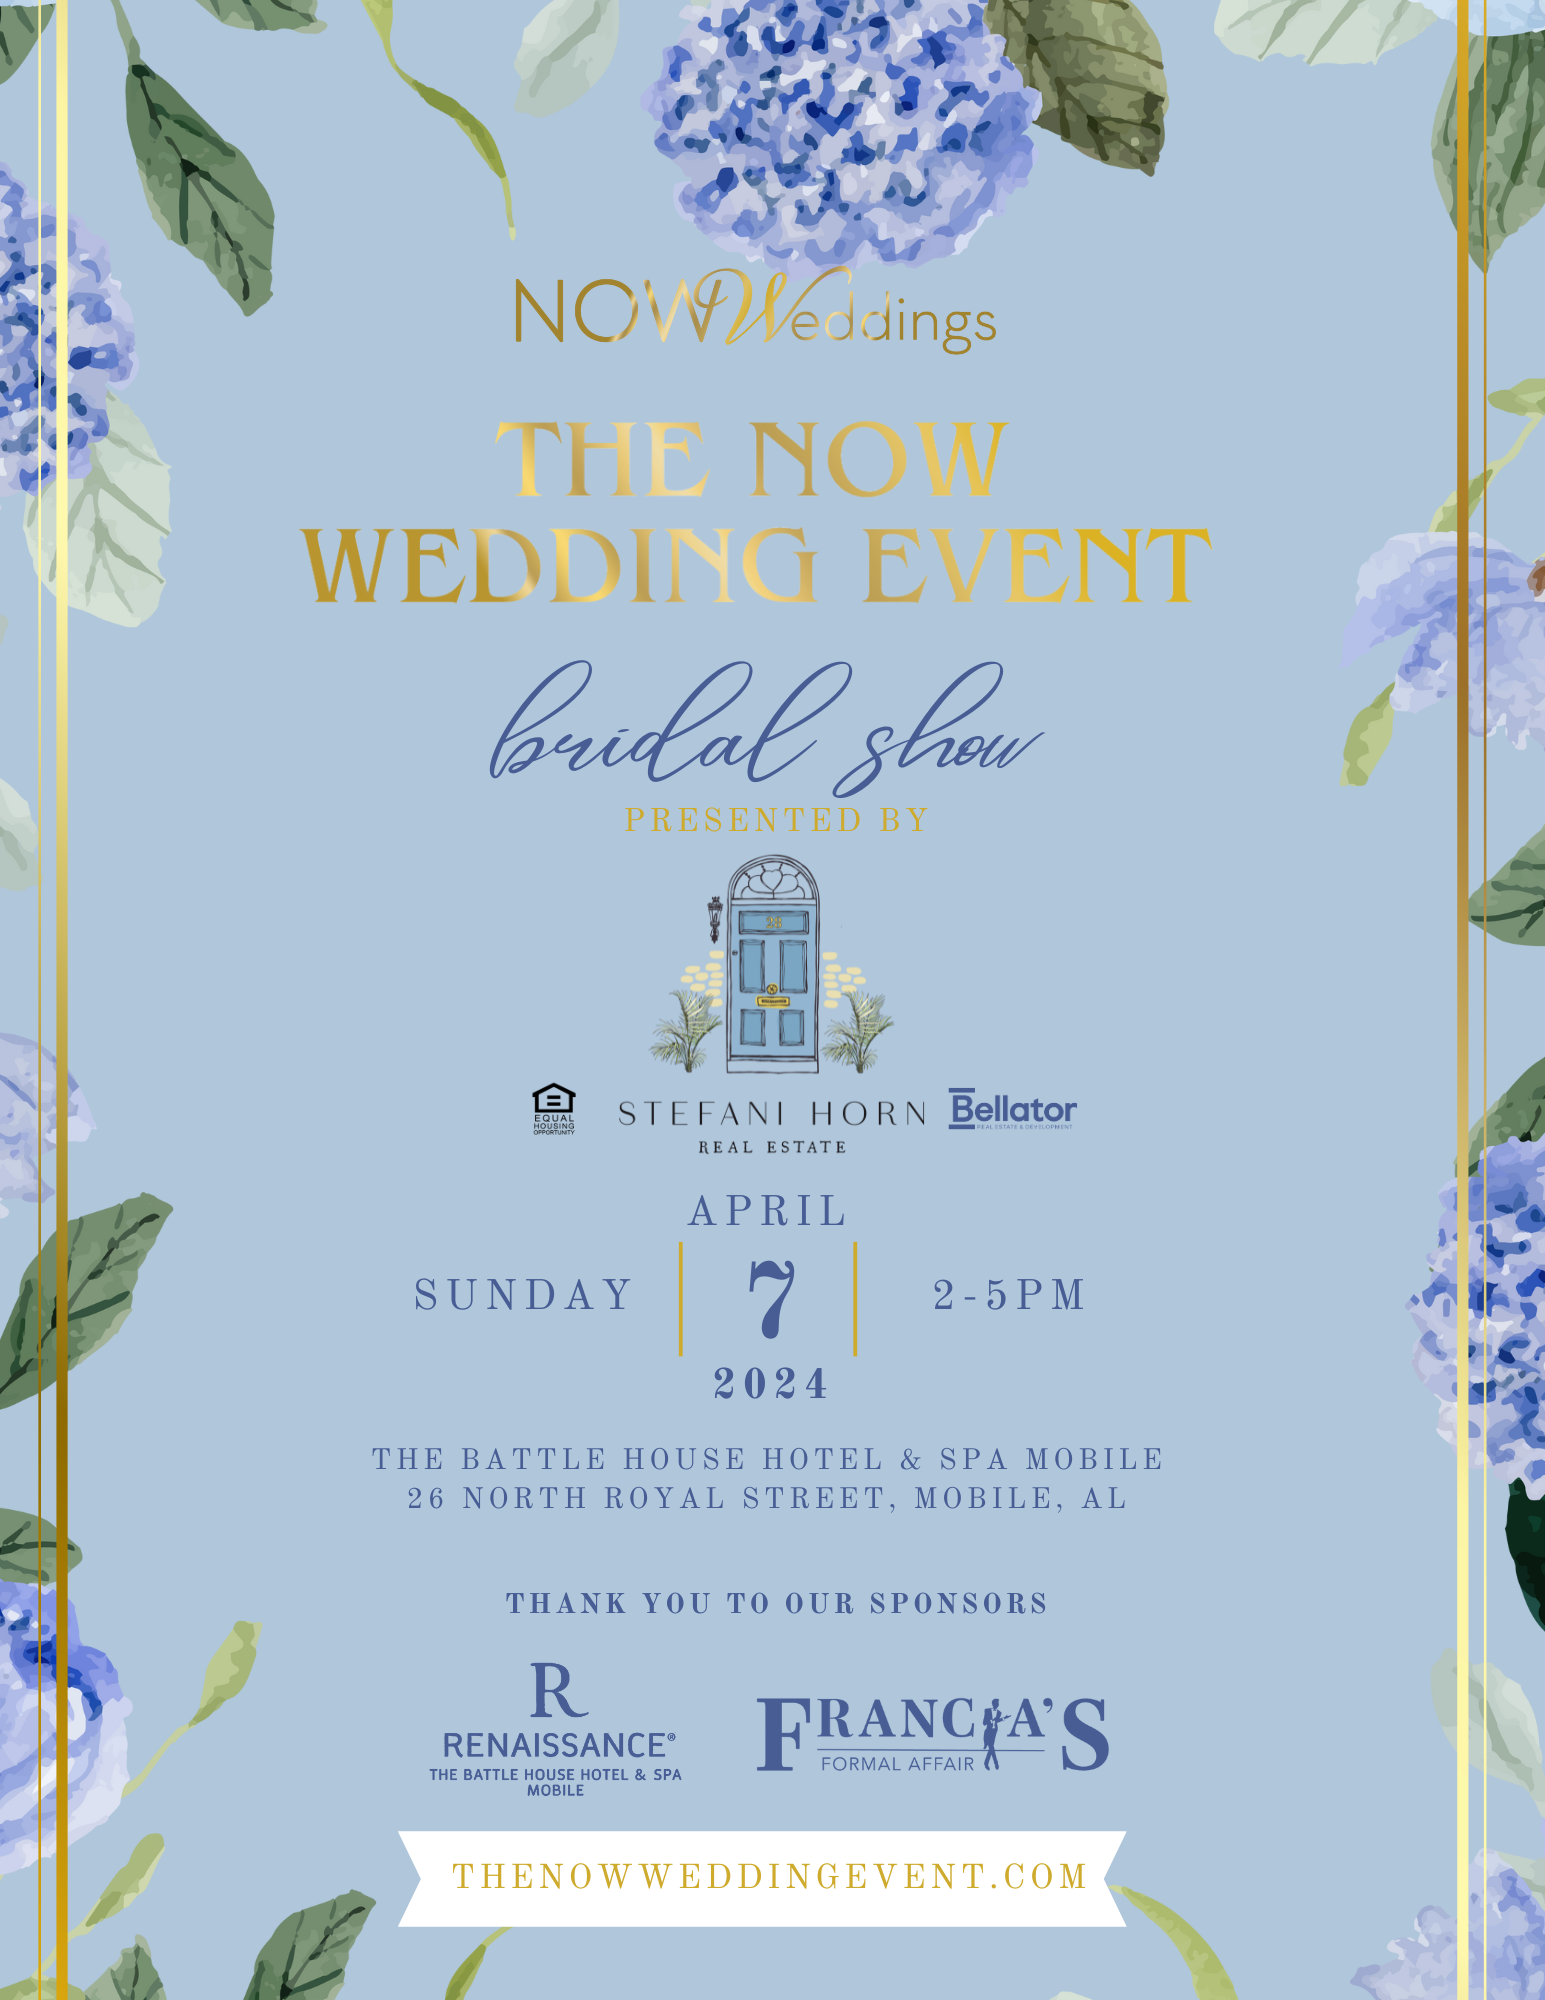 The NOW Wedding Event Bridal Show April 7, 2024, Mobile, AL presented by Stefani Horn Real Estate | Sponsored by The Battle House Hotel and Francia's Formal Affair